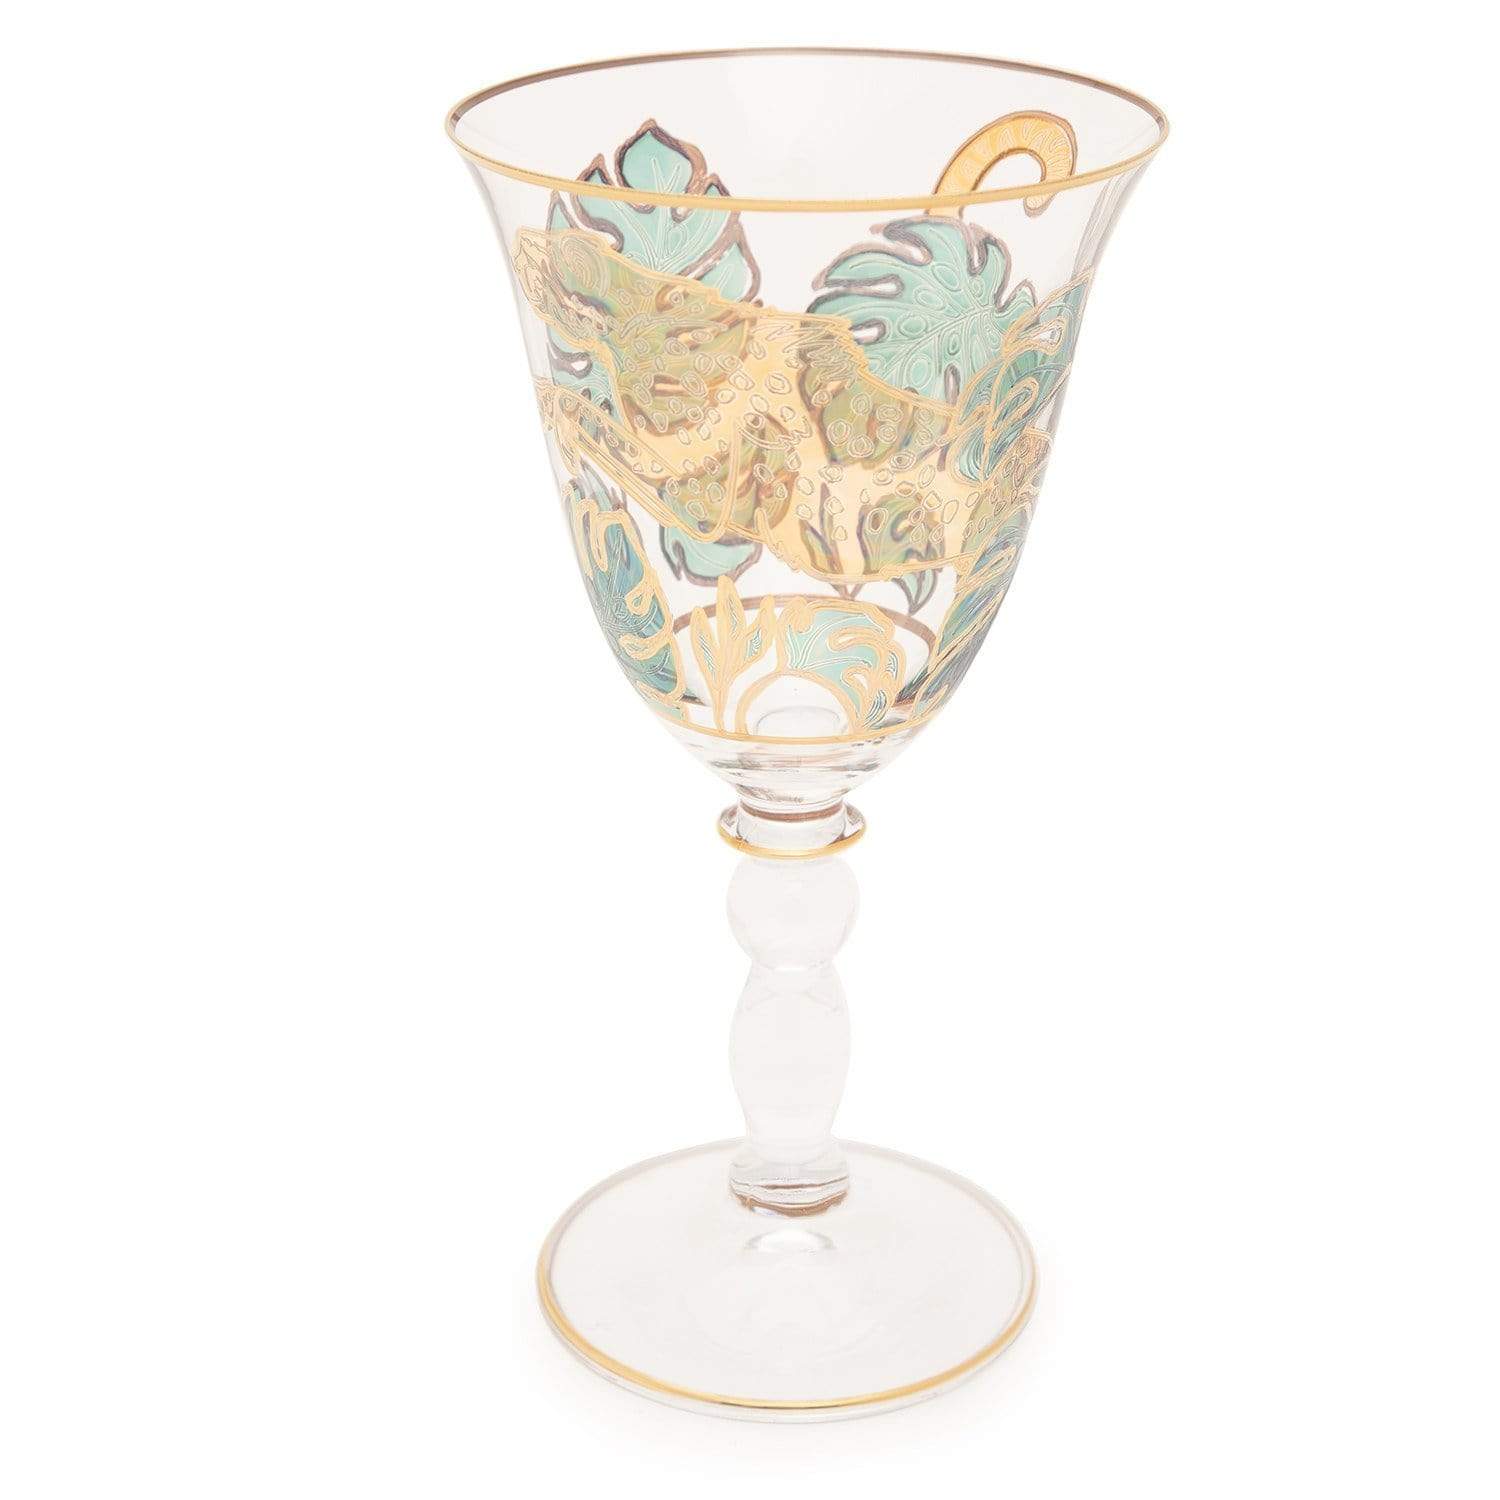 Combi Latisha Goblet Set - Green and Gold, 260 ml, Large, 6 Piece - G748Z/96 - Jashanmal Home